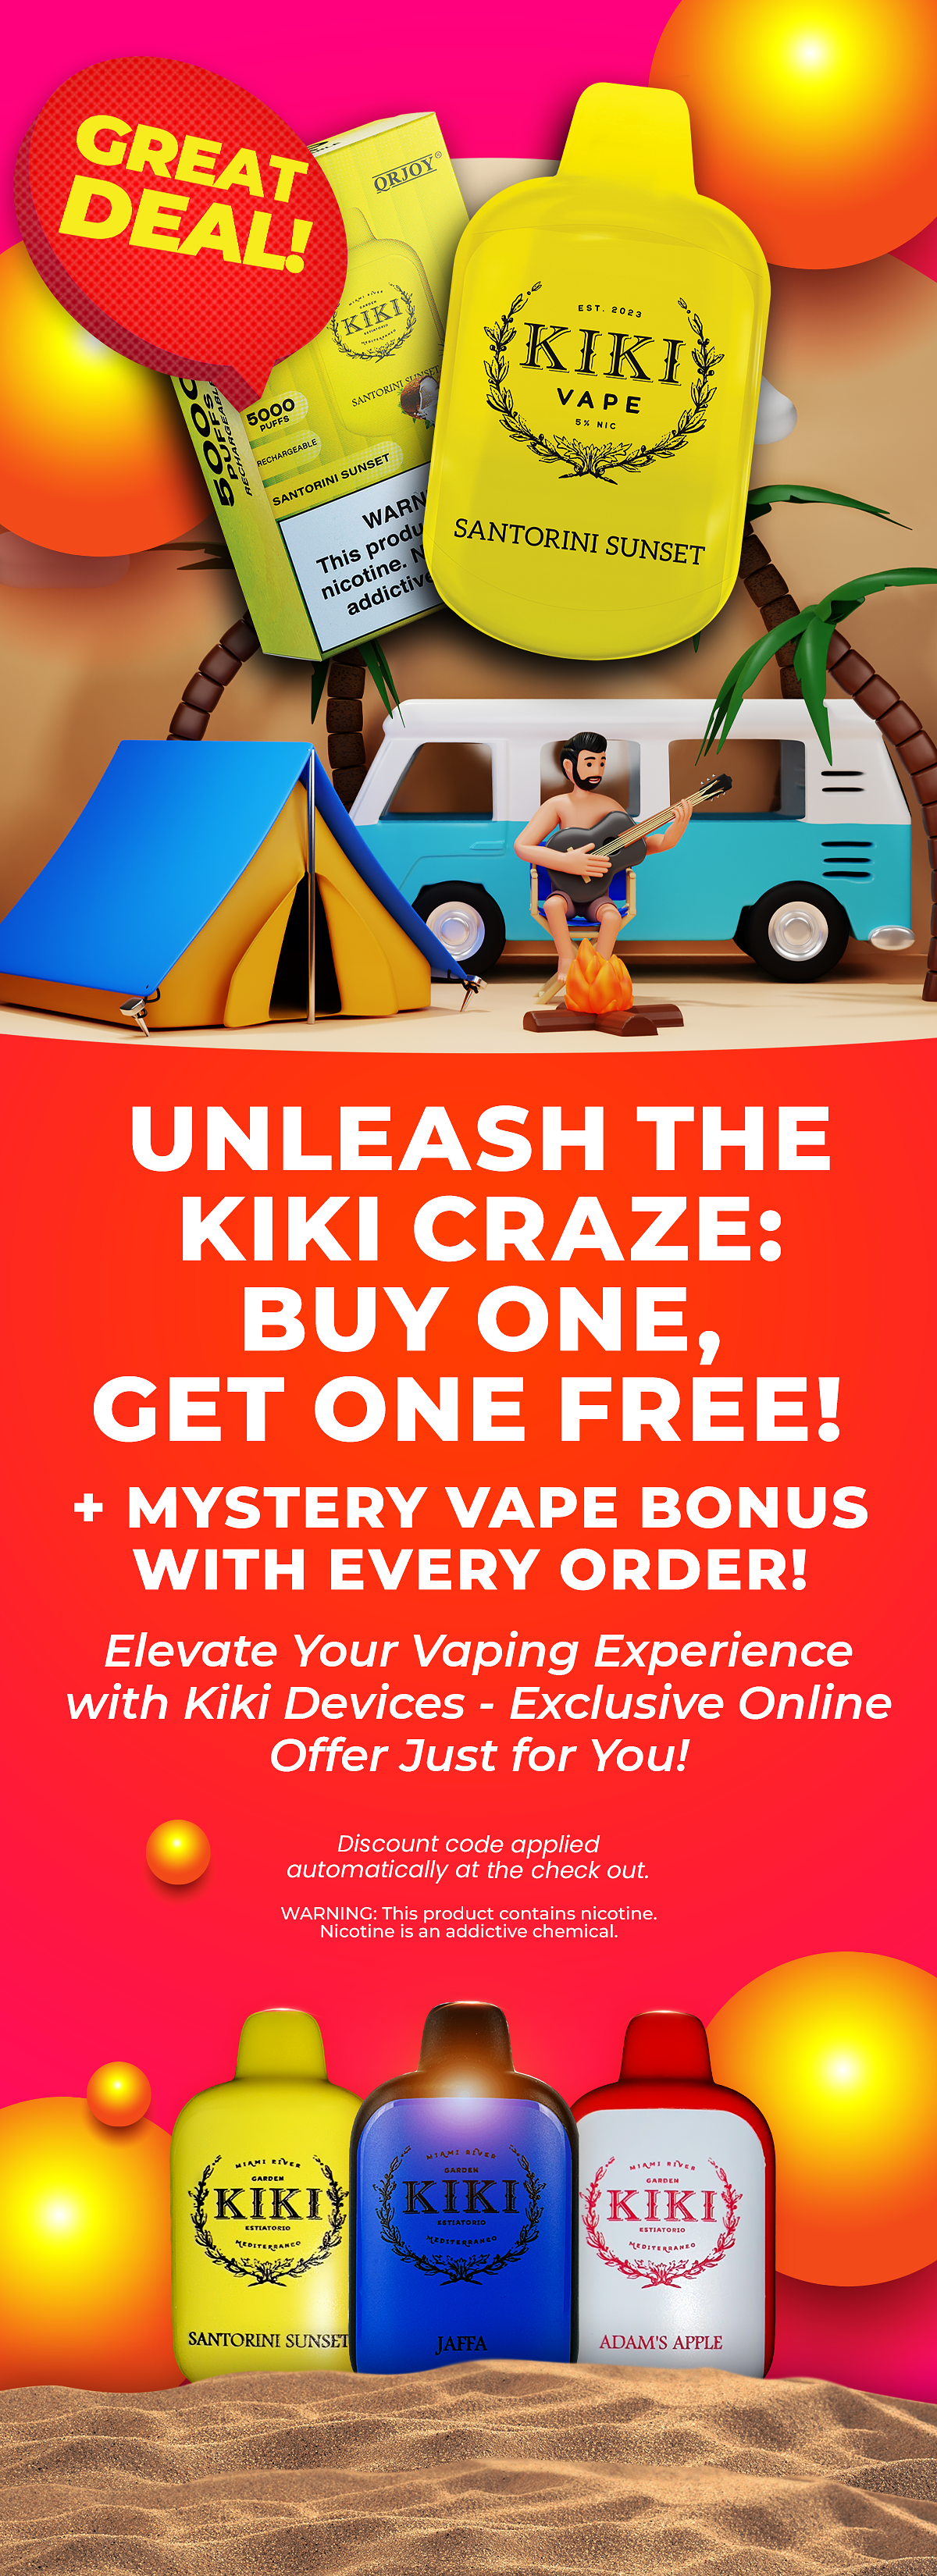  UNLEASH THE KIKI CRAZE: BUY ONE, GET ONE FREE! MYSTERY VAPE BONUS WITH EVERY ORDER! Elevate Your Vaping Experience with Kiki Devices - Exclusive Online Offer Just for You! - Discount code applied automatically at the check out. WARNING: This product contains nicotine. Nicotine is an addictive chemical. 